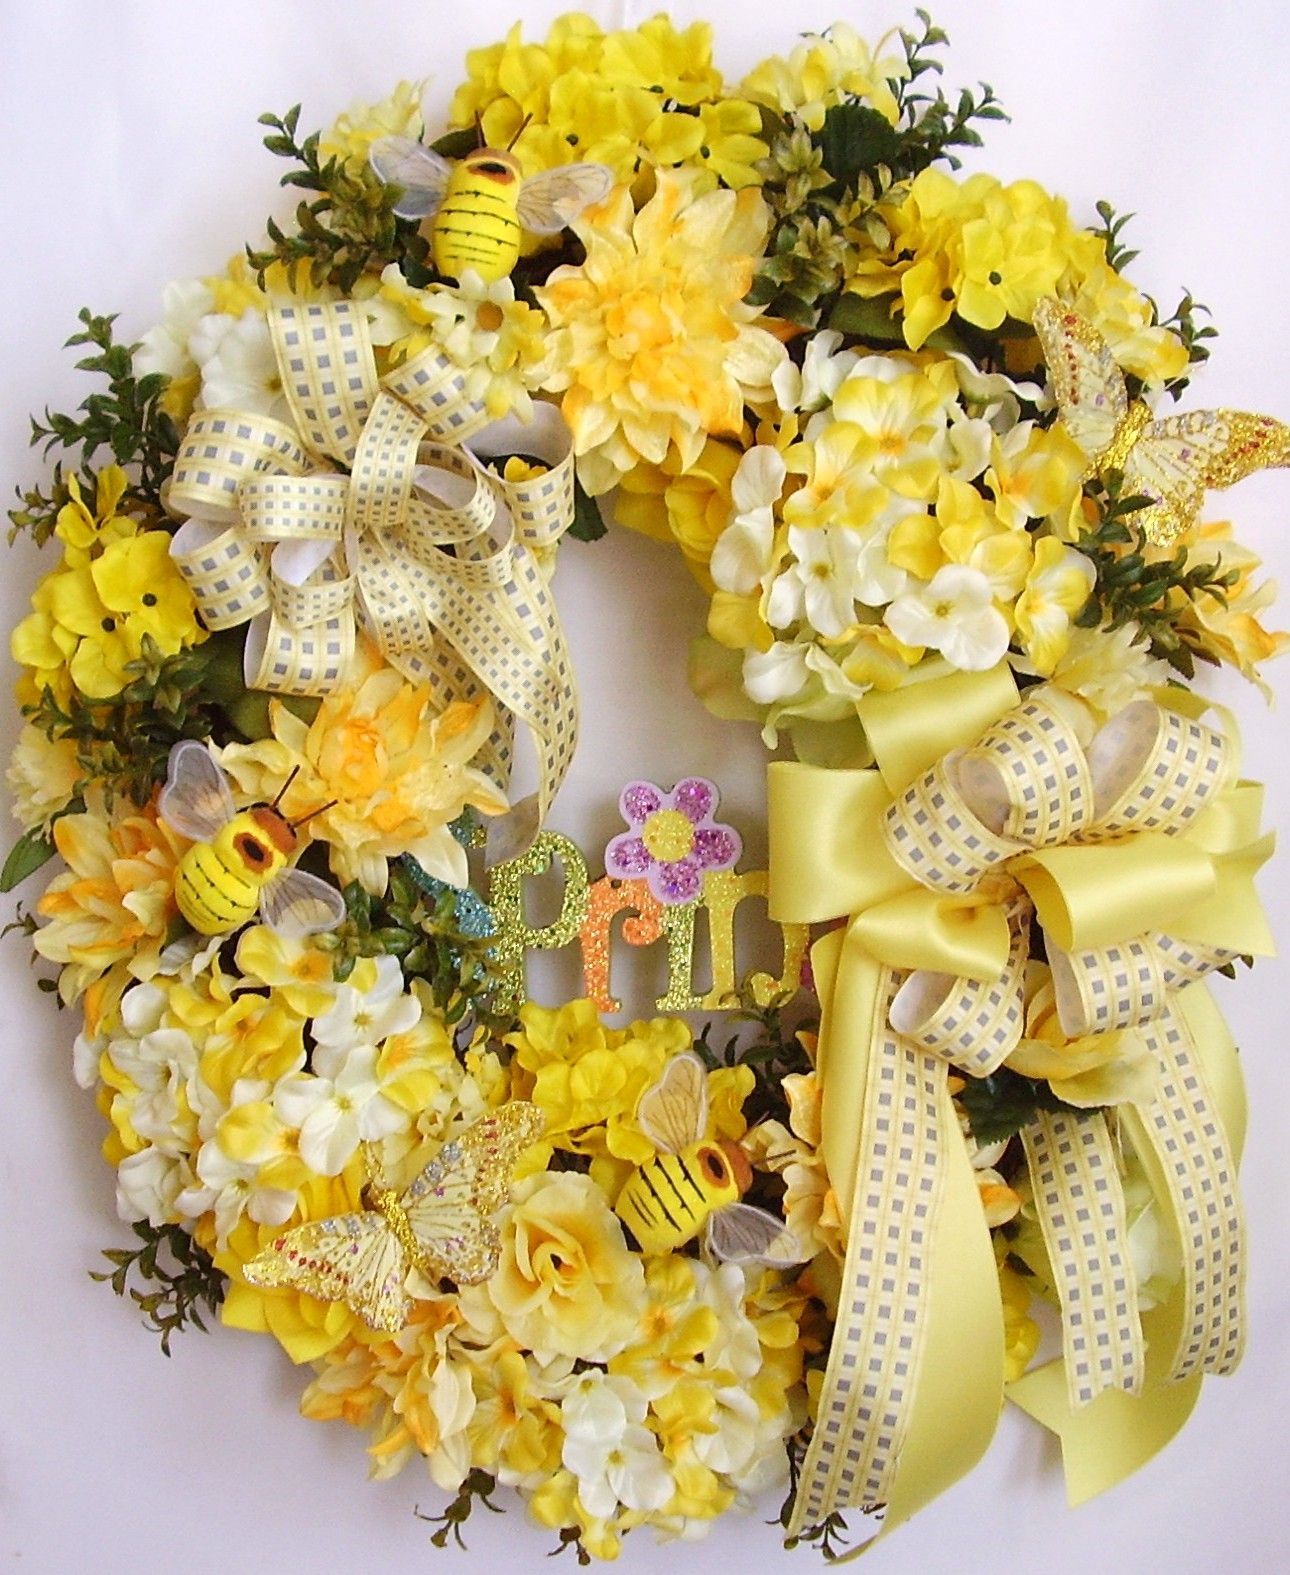 Spring+Wreath+Easter+Wreath+Mothers+Day+Wreath++by+WreathbyHH,+$84.95